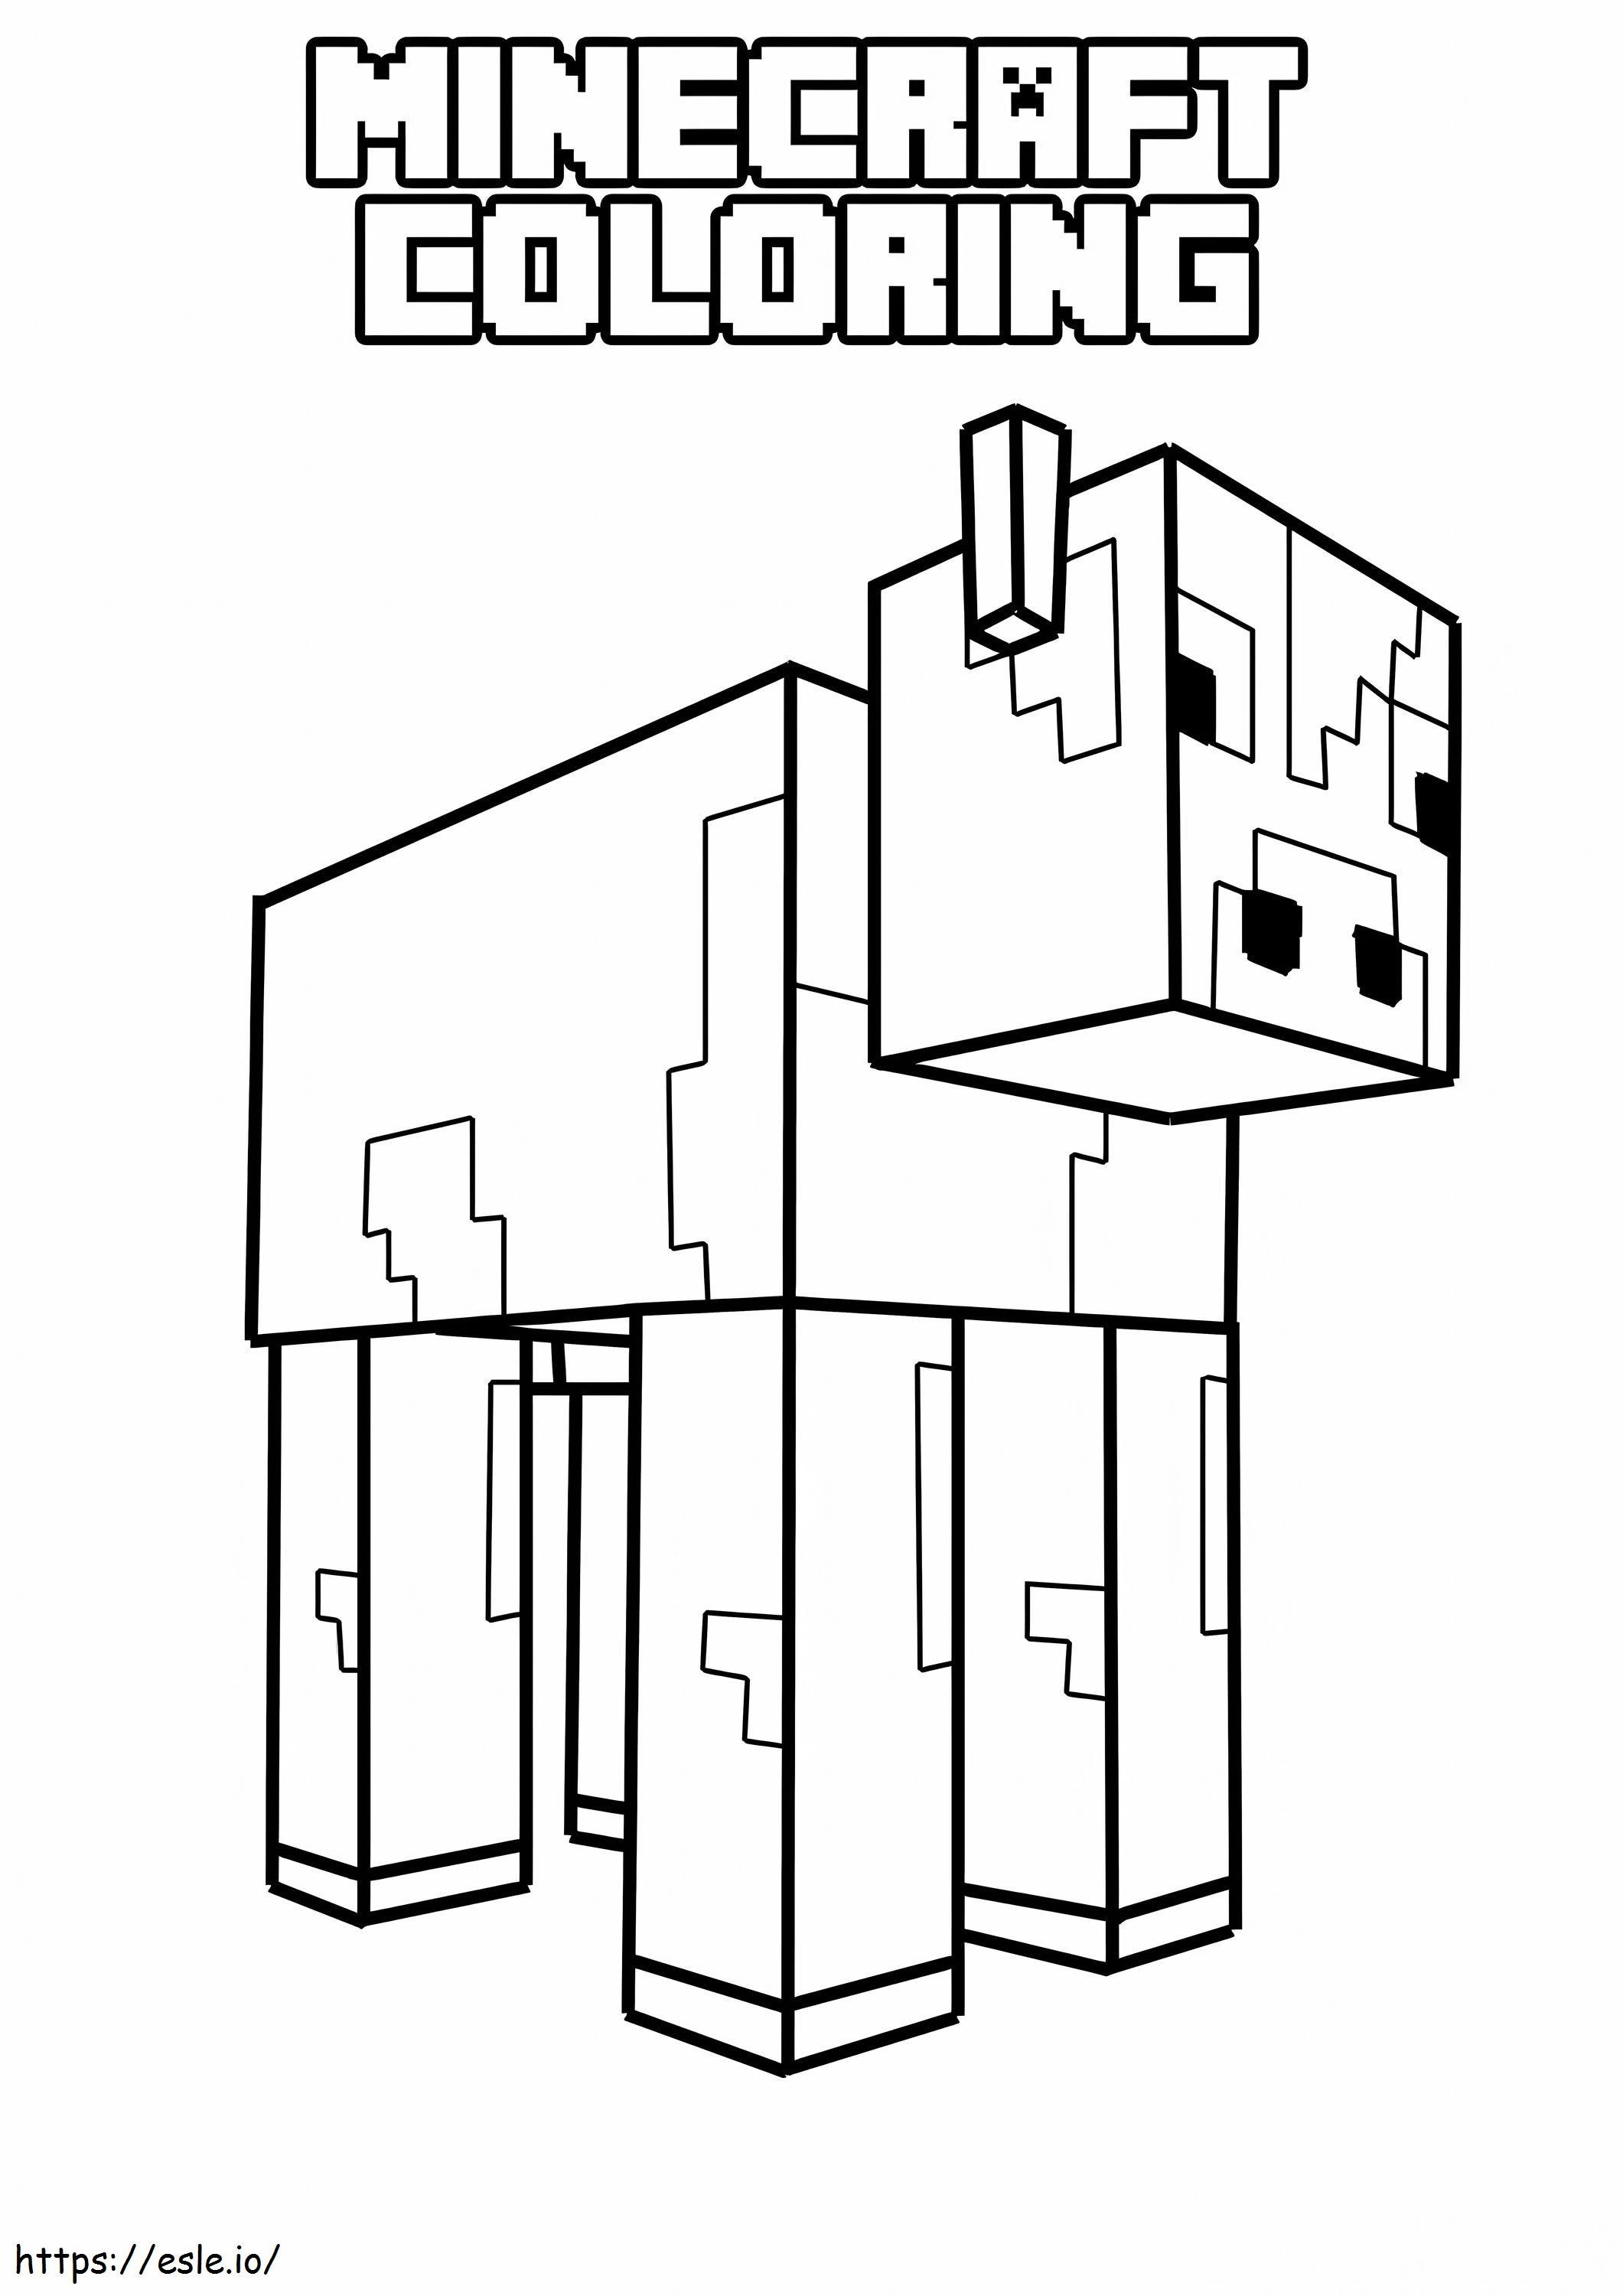 Printable Minecraft Pinterest Free Activity Pages coloring page